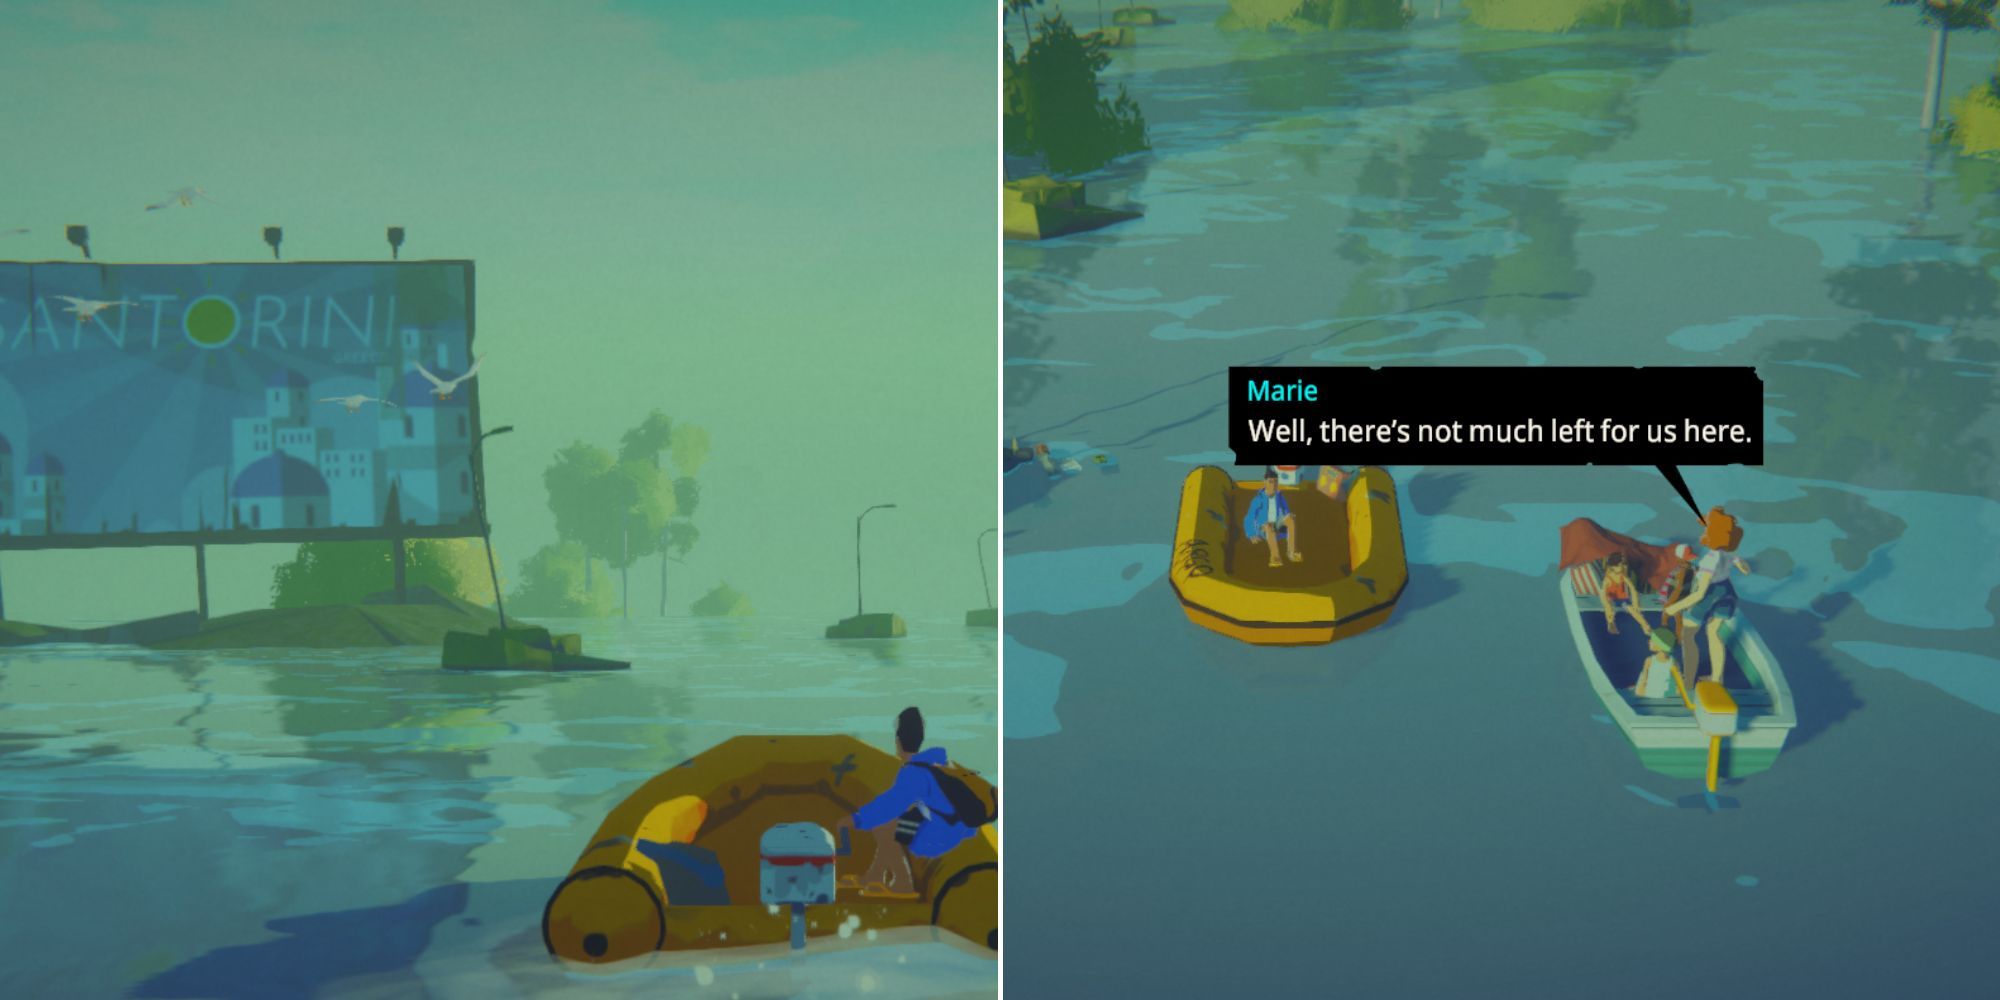 The Player Sailing Past A Billboard In A Sunken City And The Player Talking To Marie In Highwater